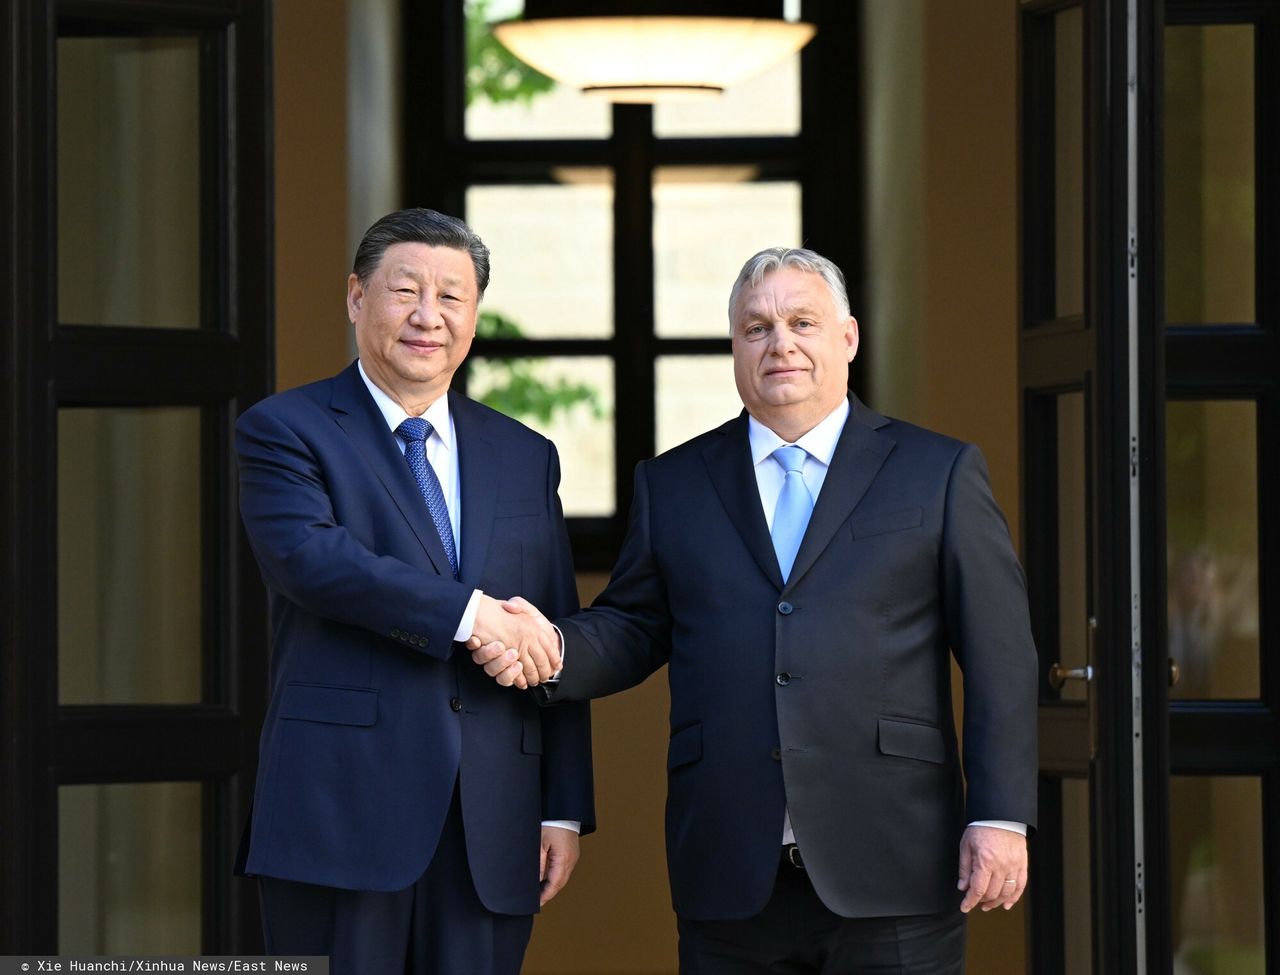 The leader of China, Xi Jinping, while traveling through Europe, met with the Prime Minister of Hungary, Viktor Orban.